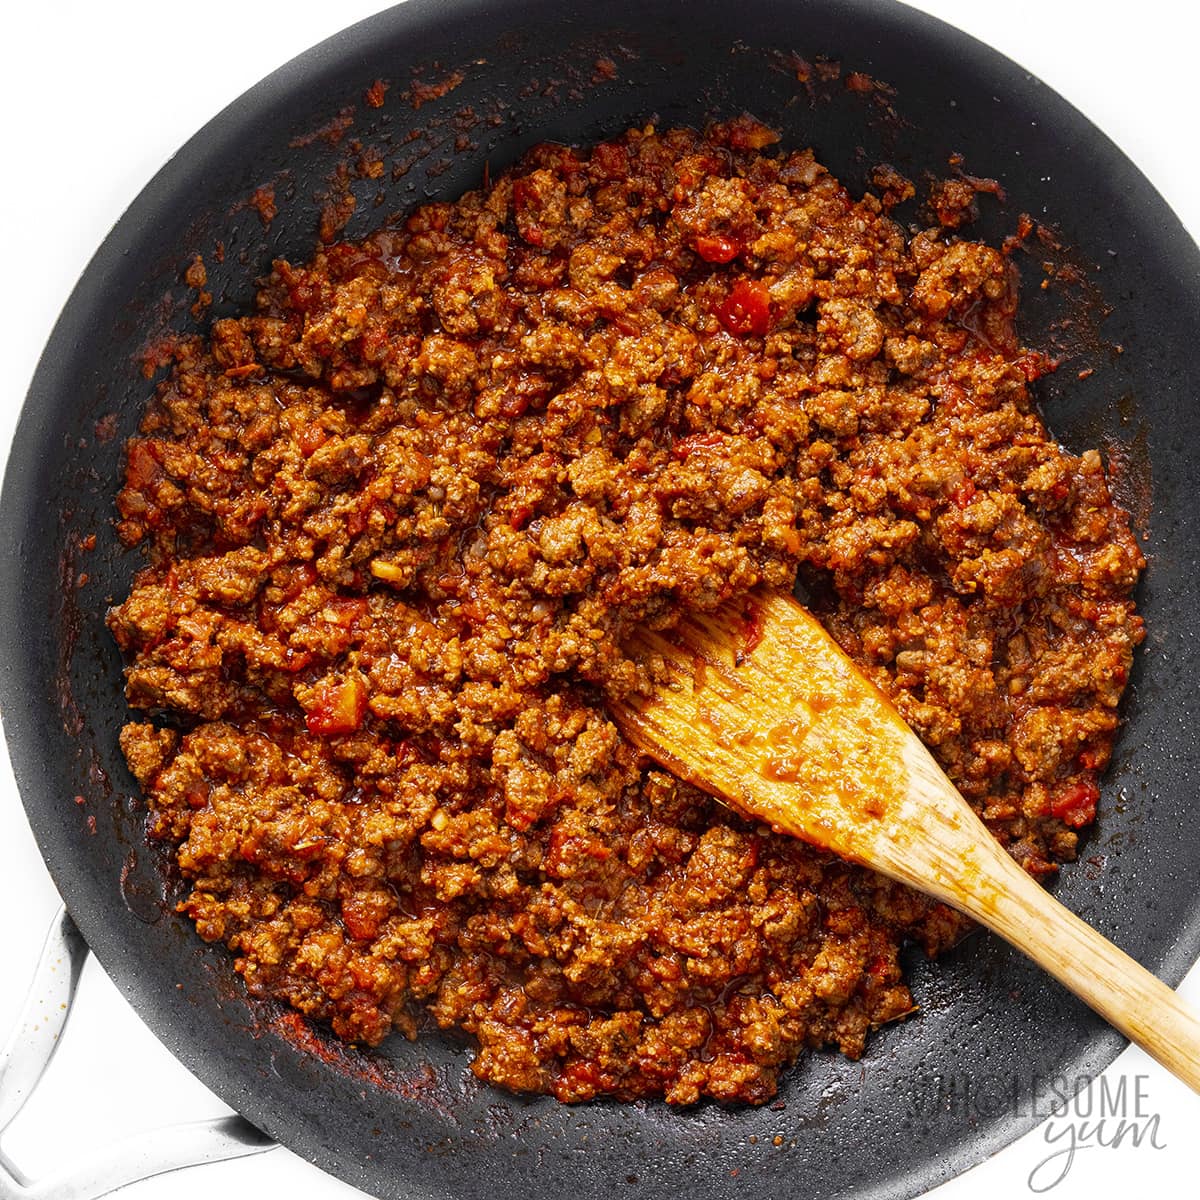 Meat sauce mixture simmering in a pan.